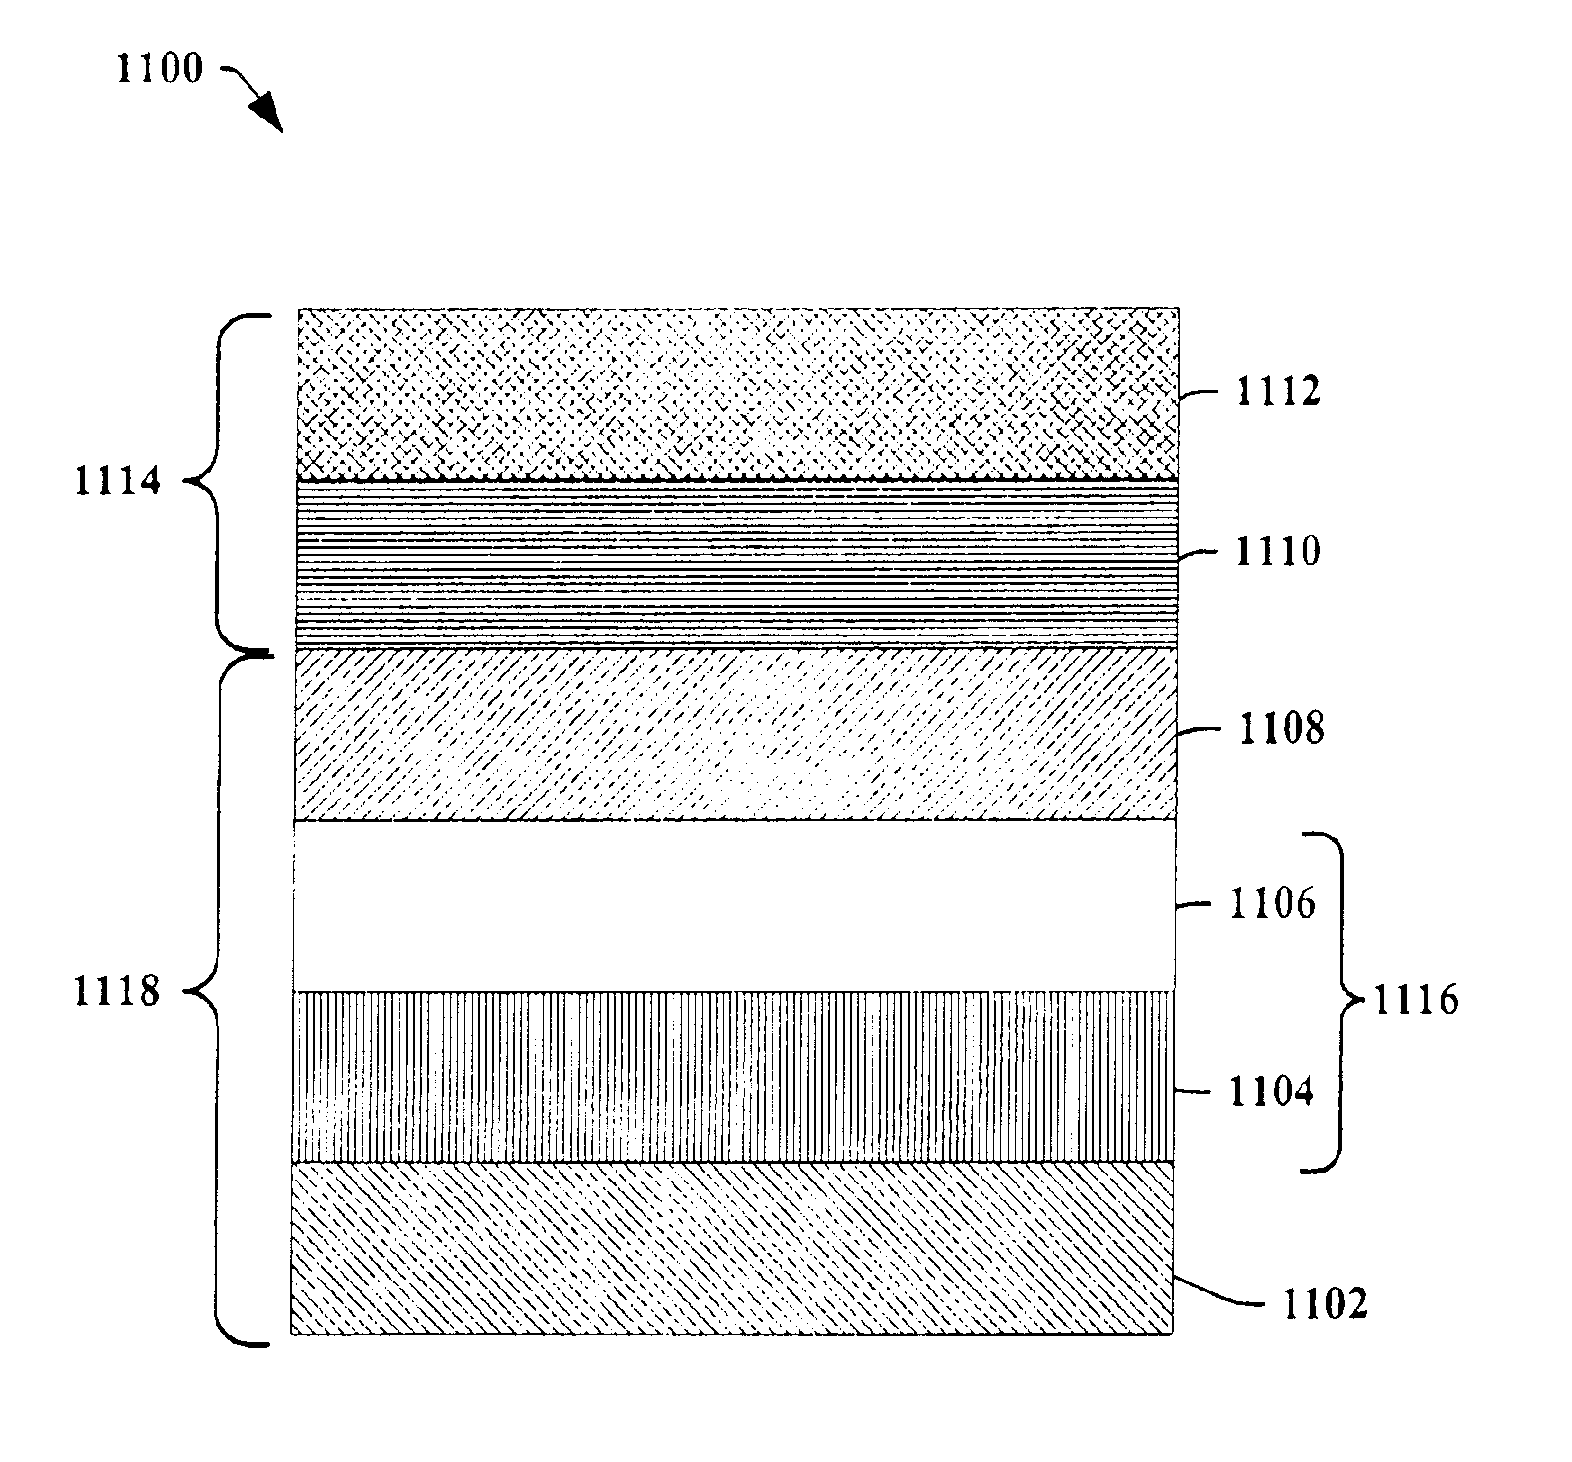 Control of memory arrays utilizing zener diode-like devices